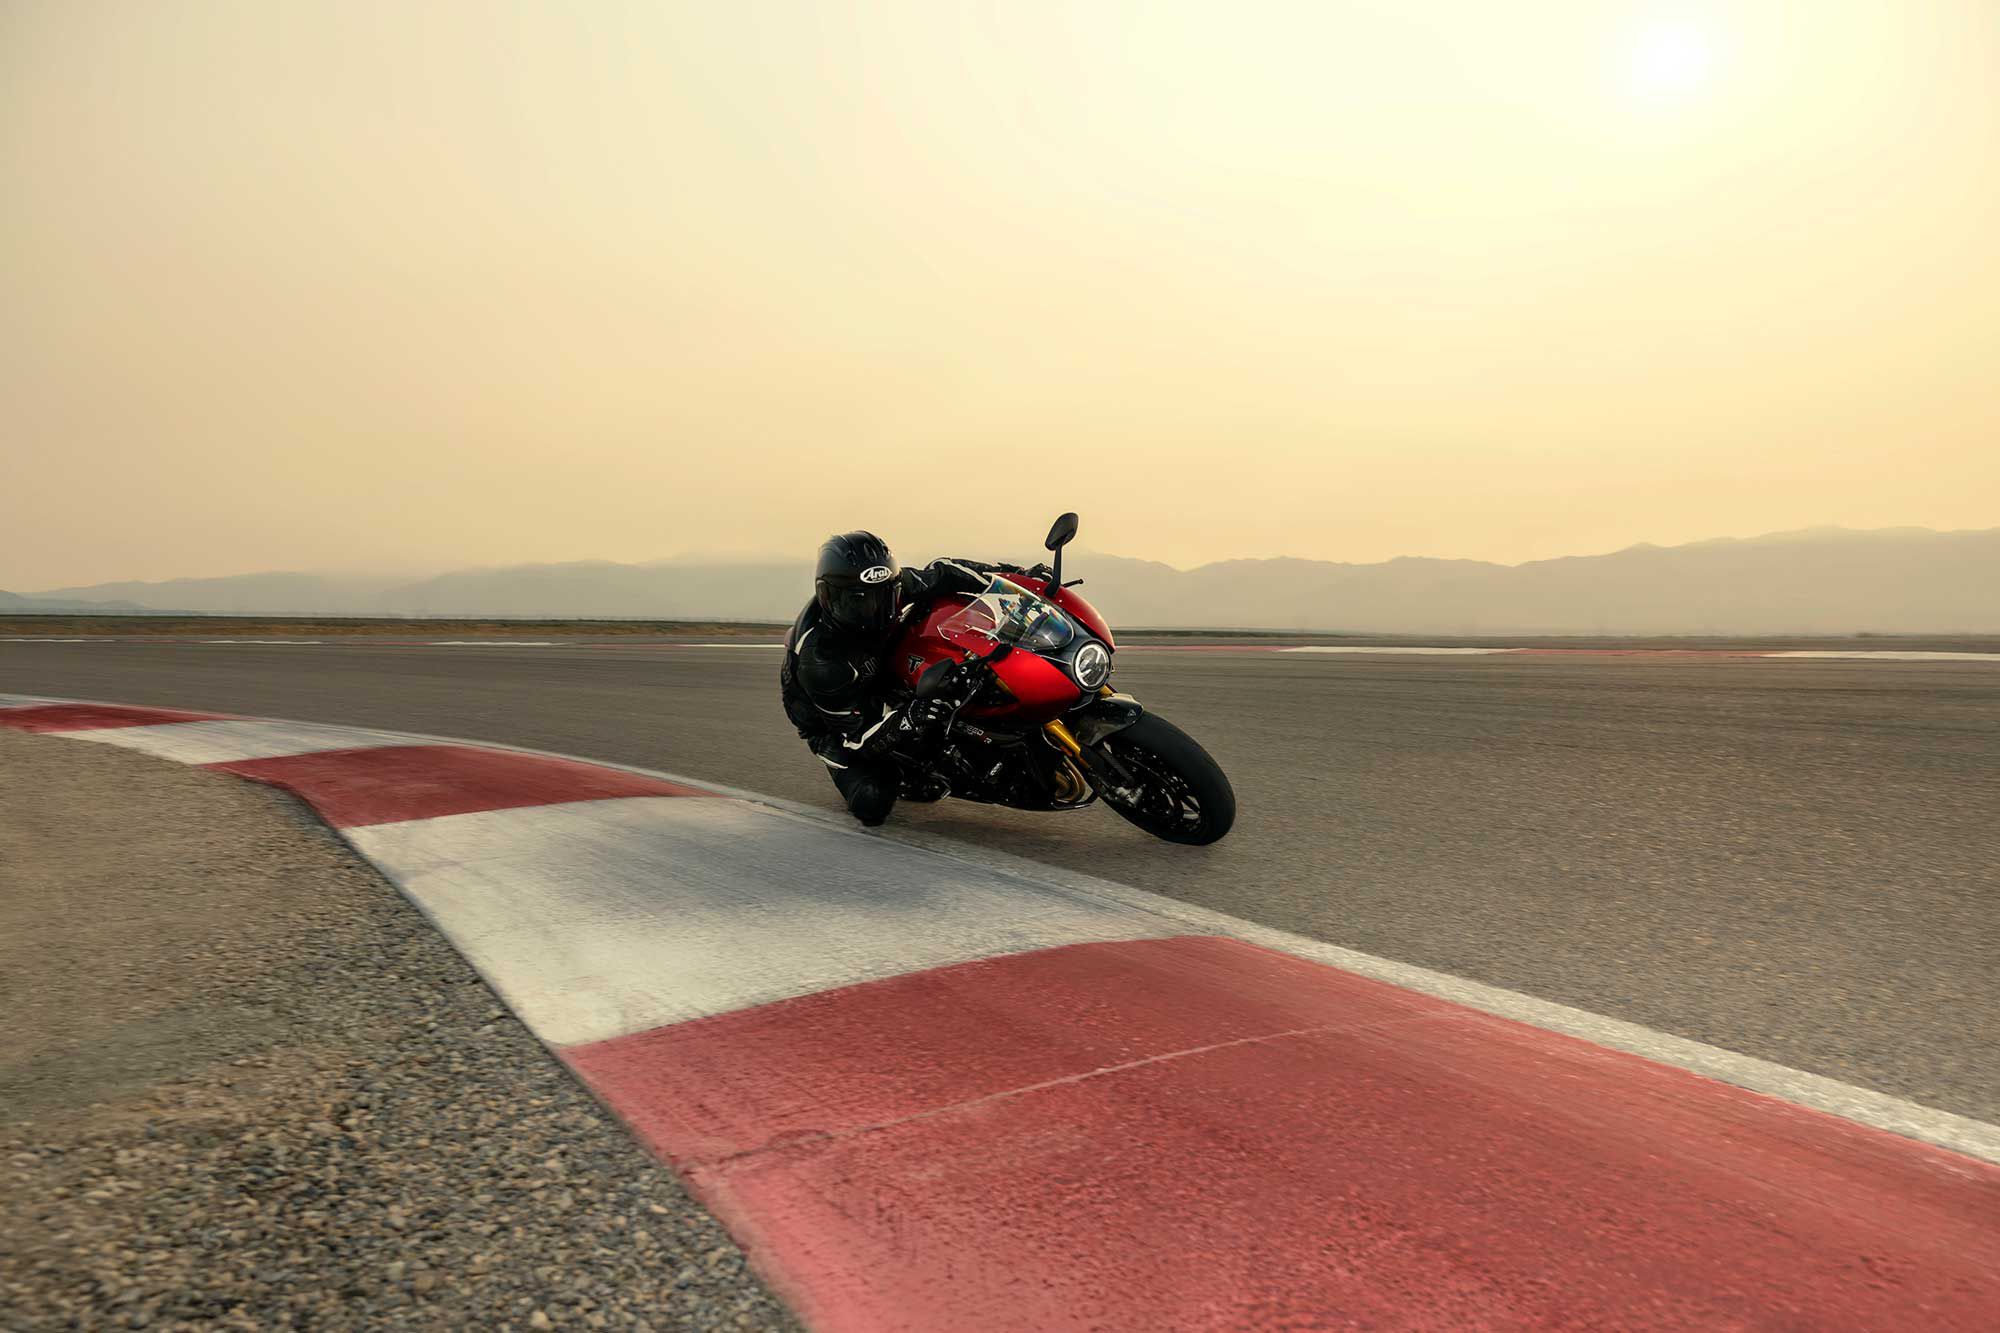 Pricing starts at $20,950 for a 2022 Triumph Speed Triple 1200 RR.